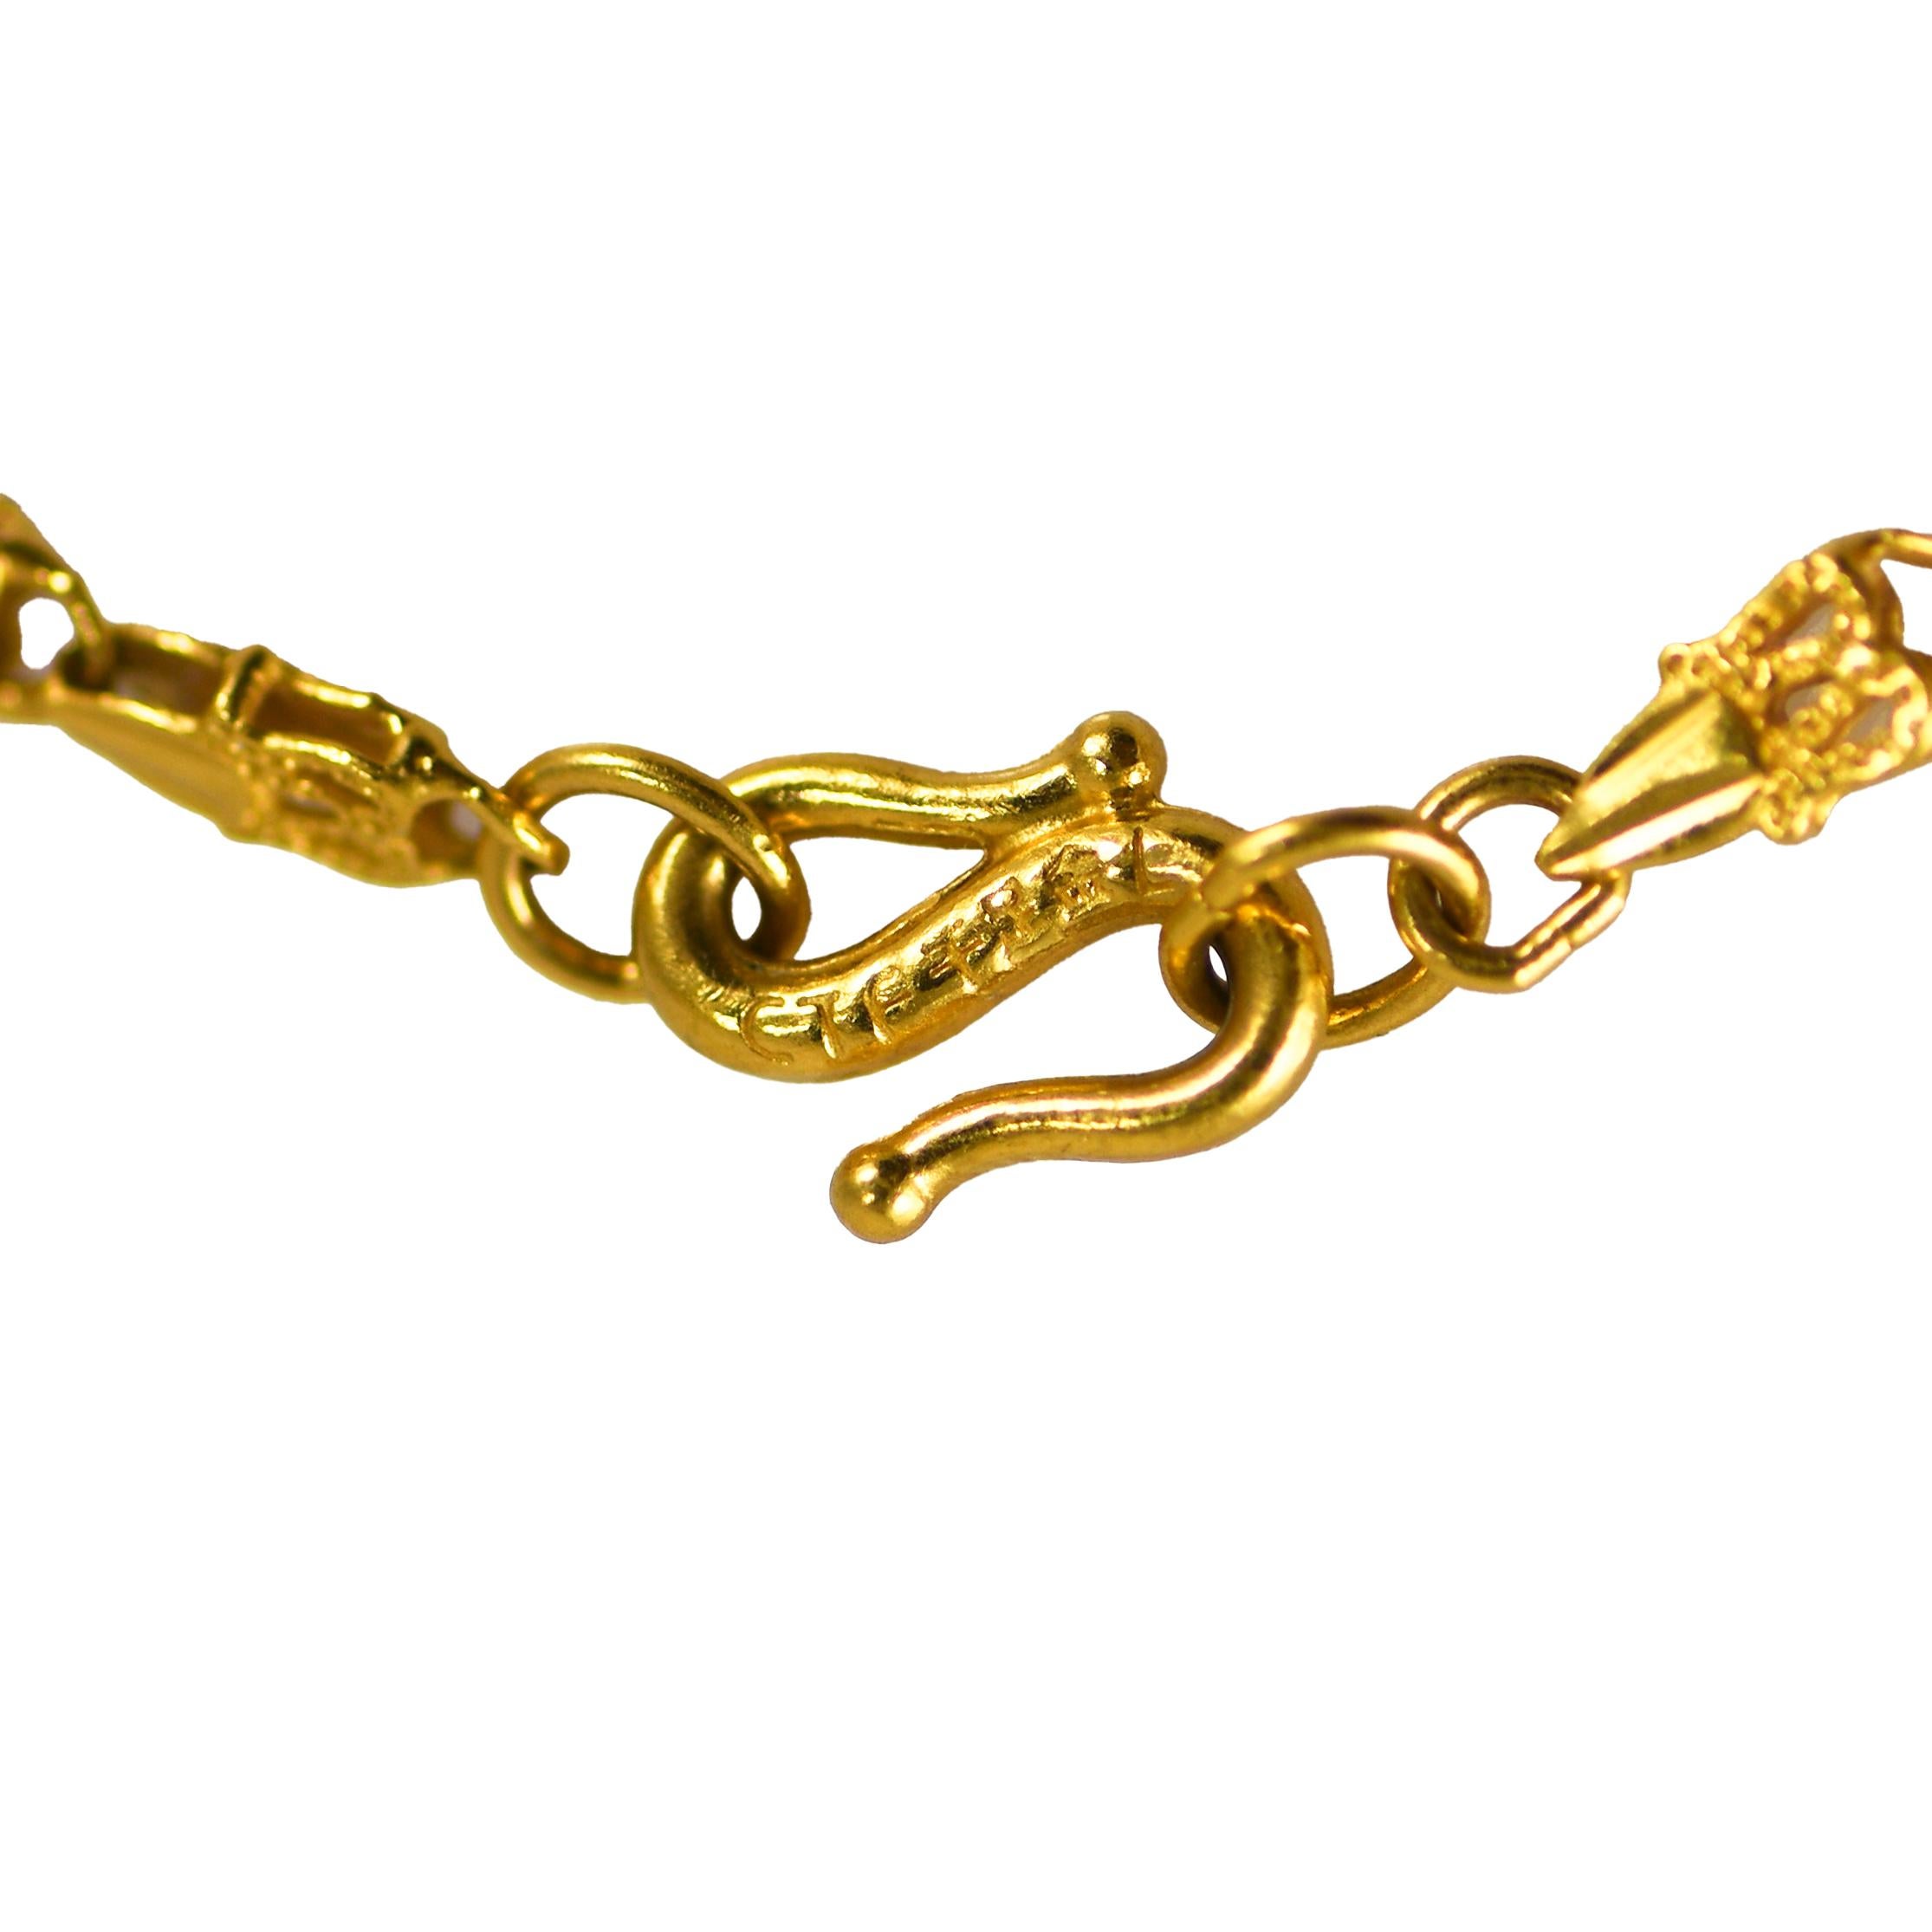 24k bracelet with fancy style links.
Tests 24k, weighs 5.6g
will fit 7 1/4in wrist